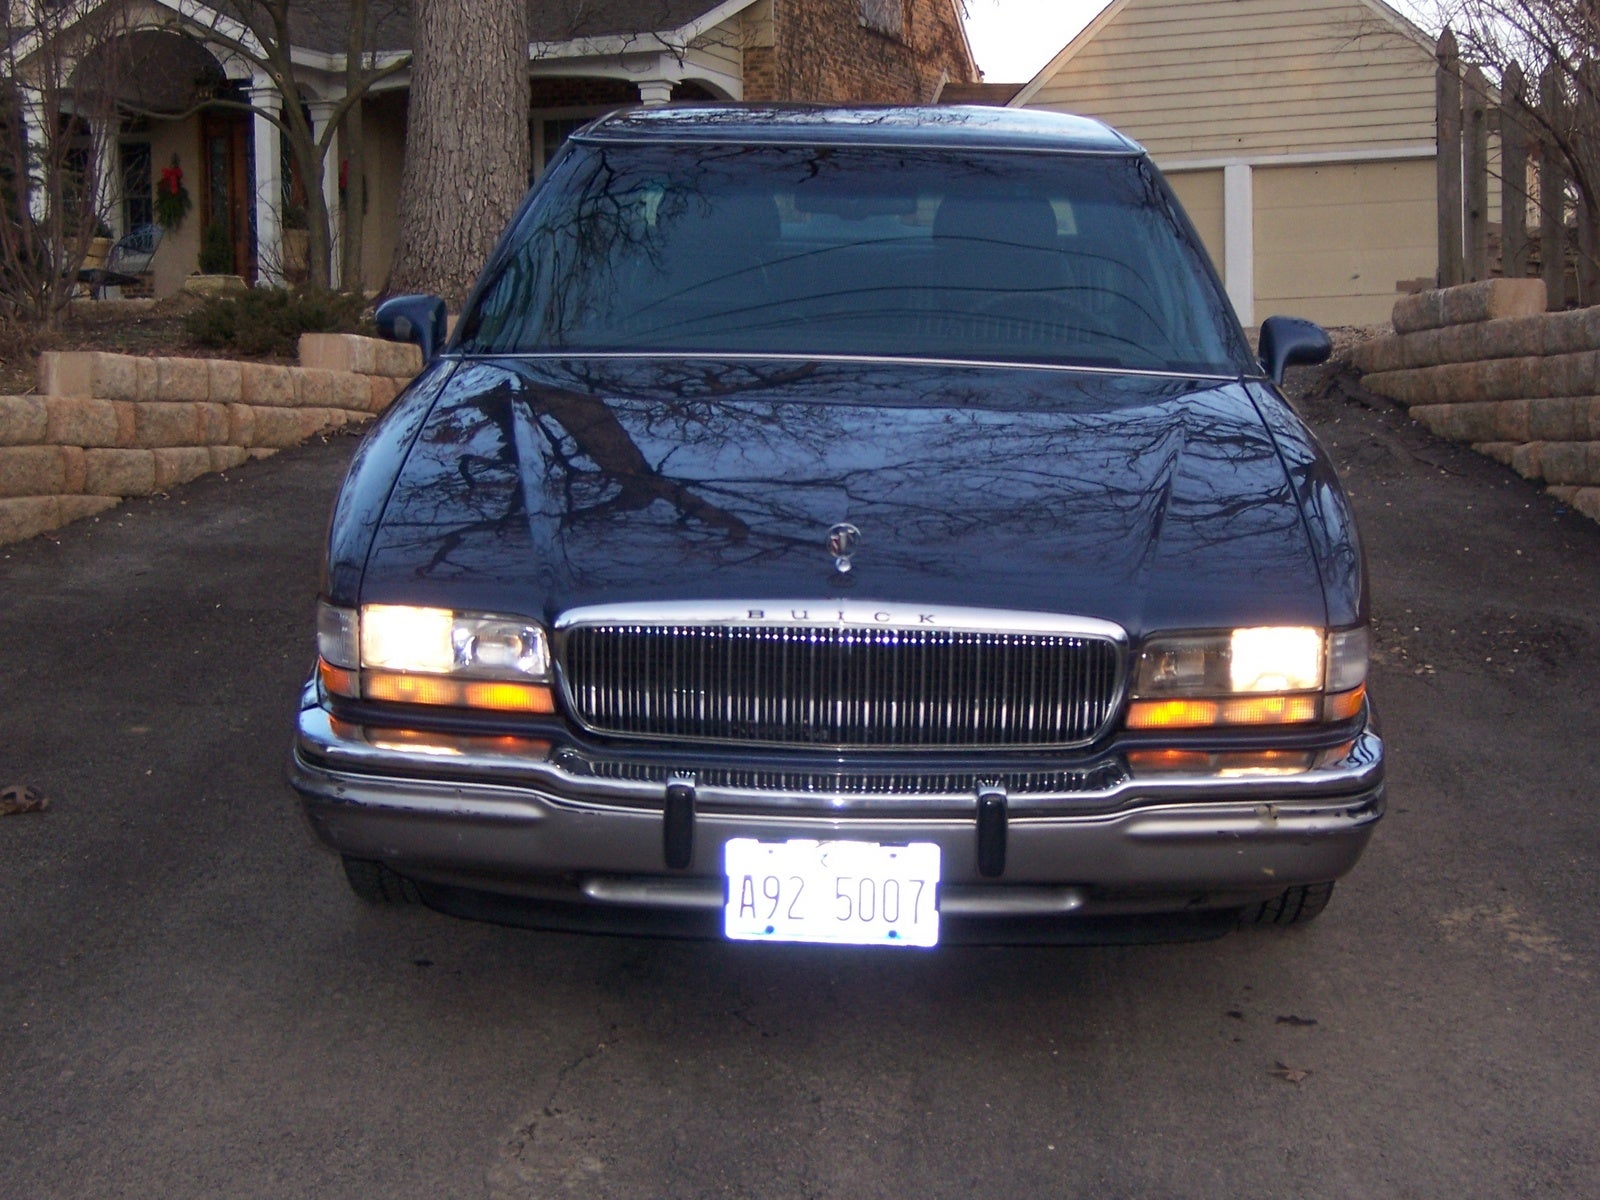 1996 Buick Park Avenue 4 Dr Ultra Supercharged Sedan - Overview ...